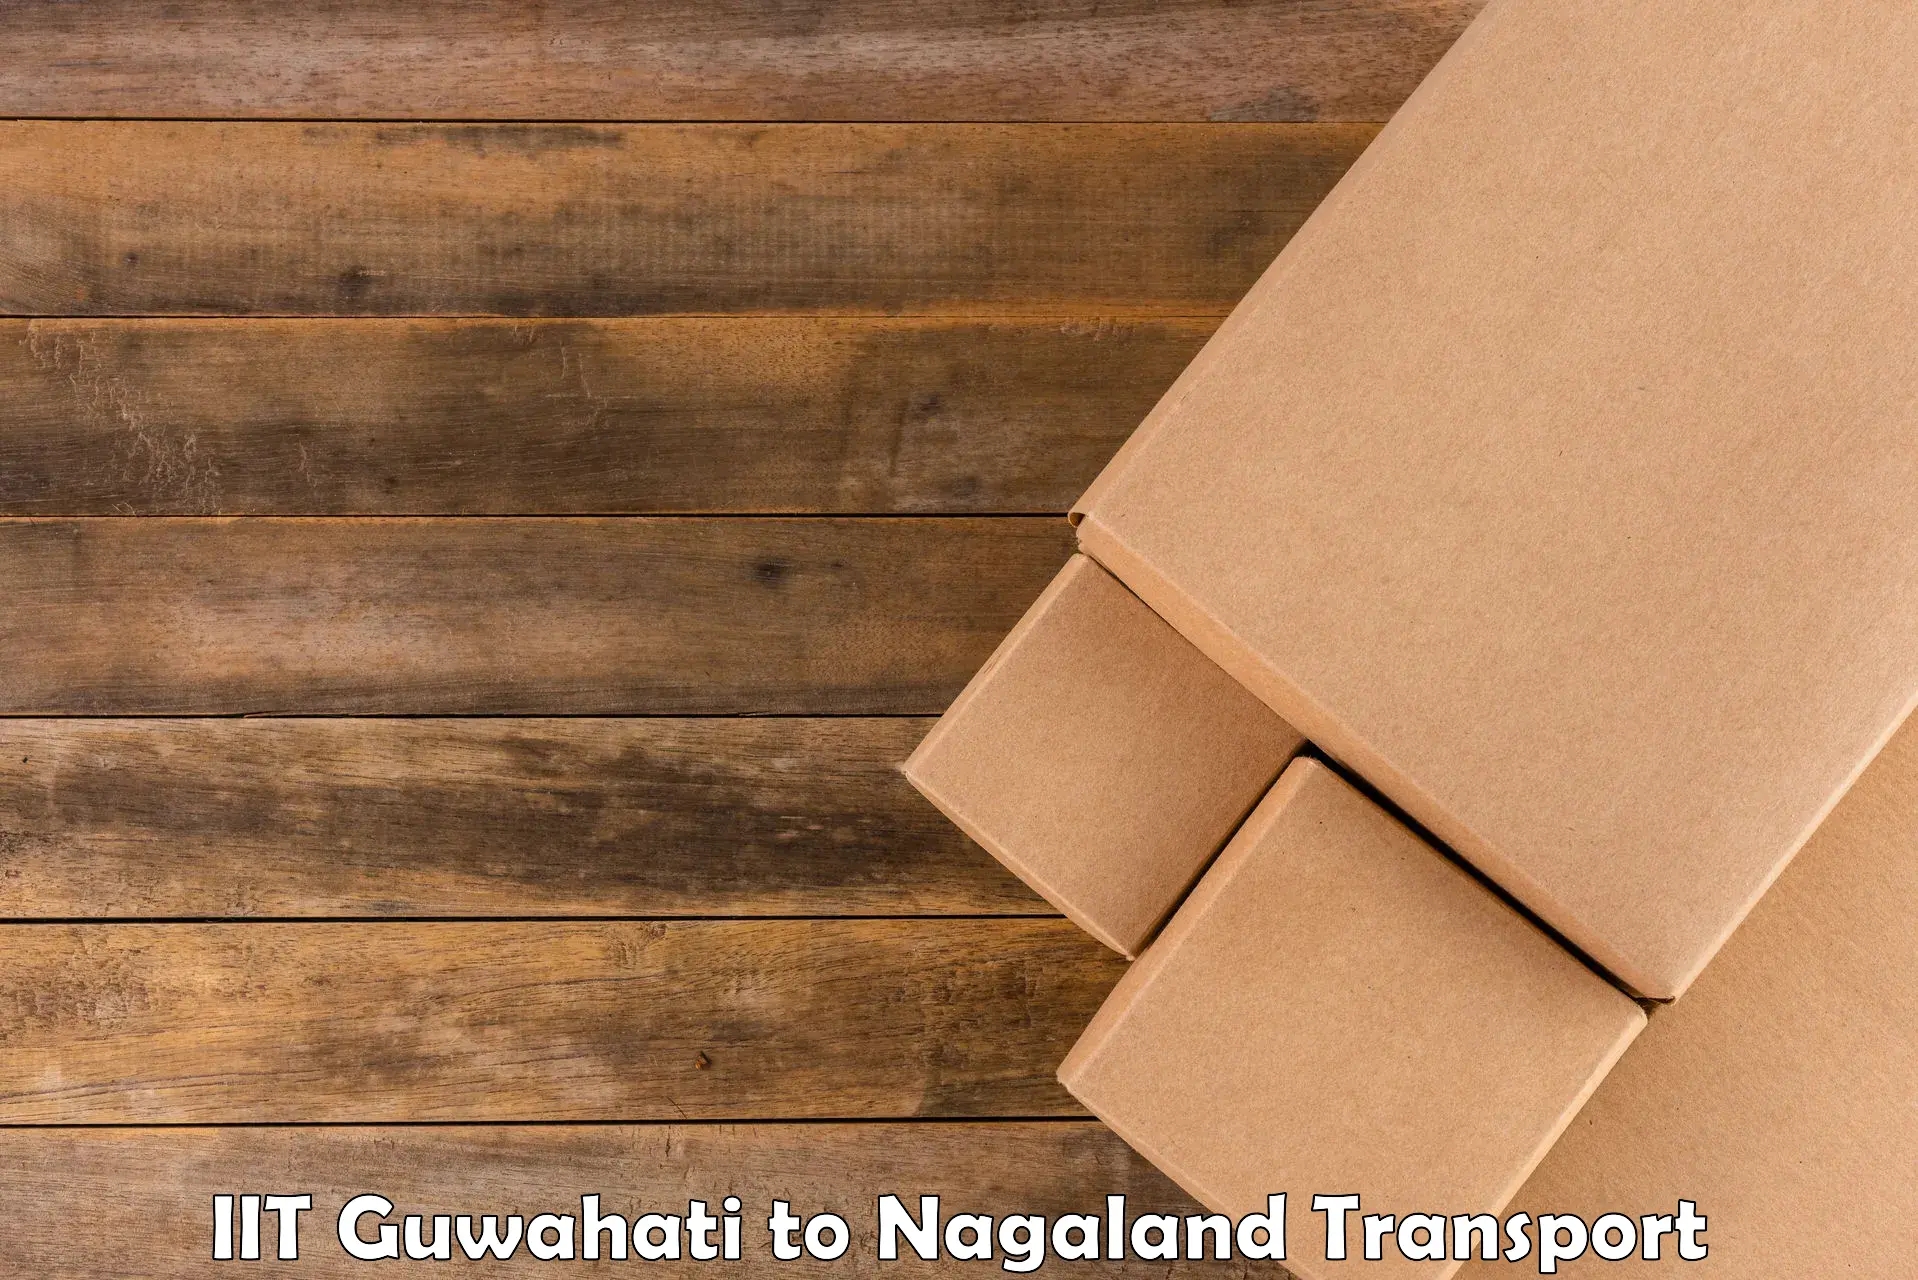 Air freight transport services IIT Guwahati to Nagaland